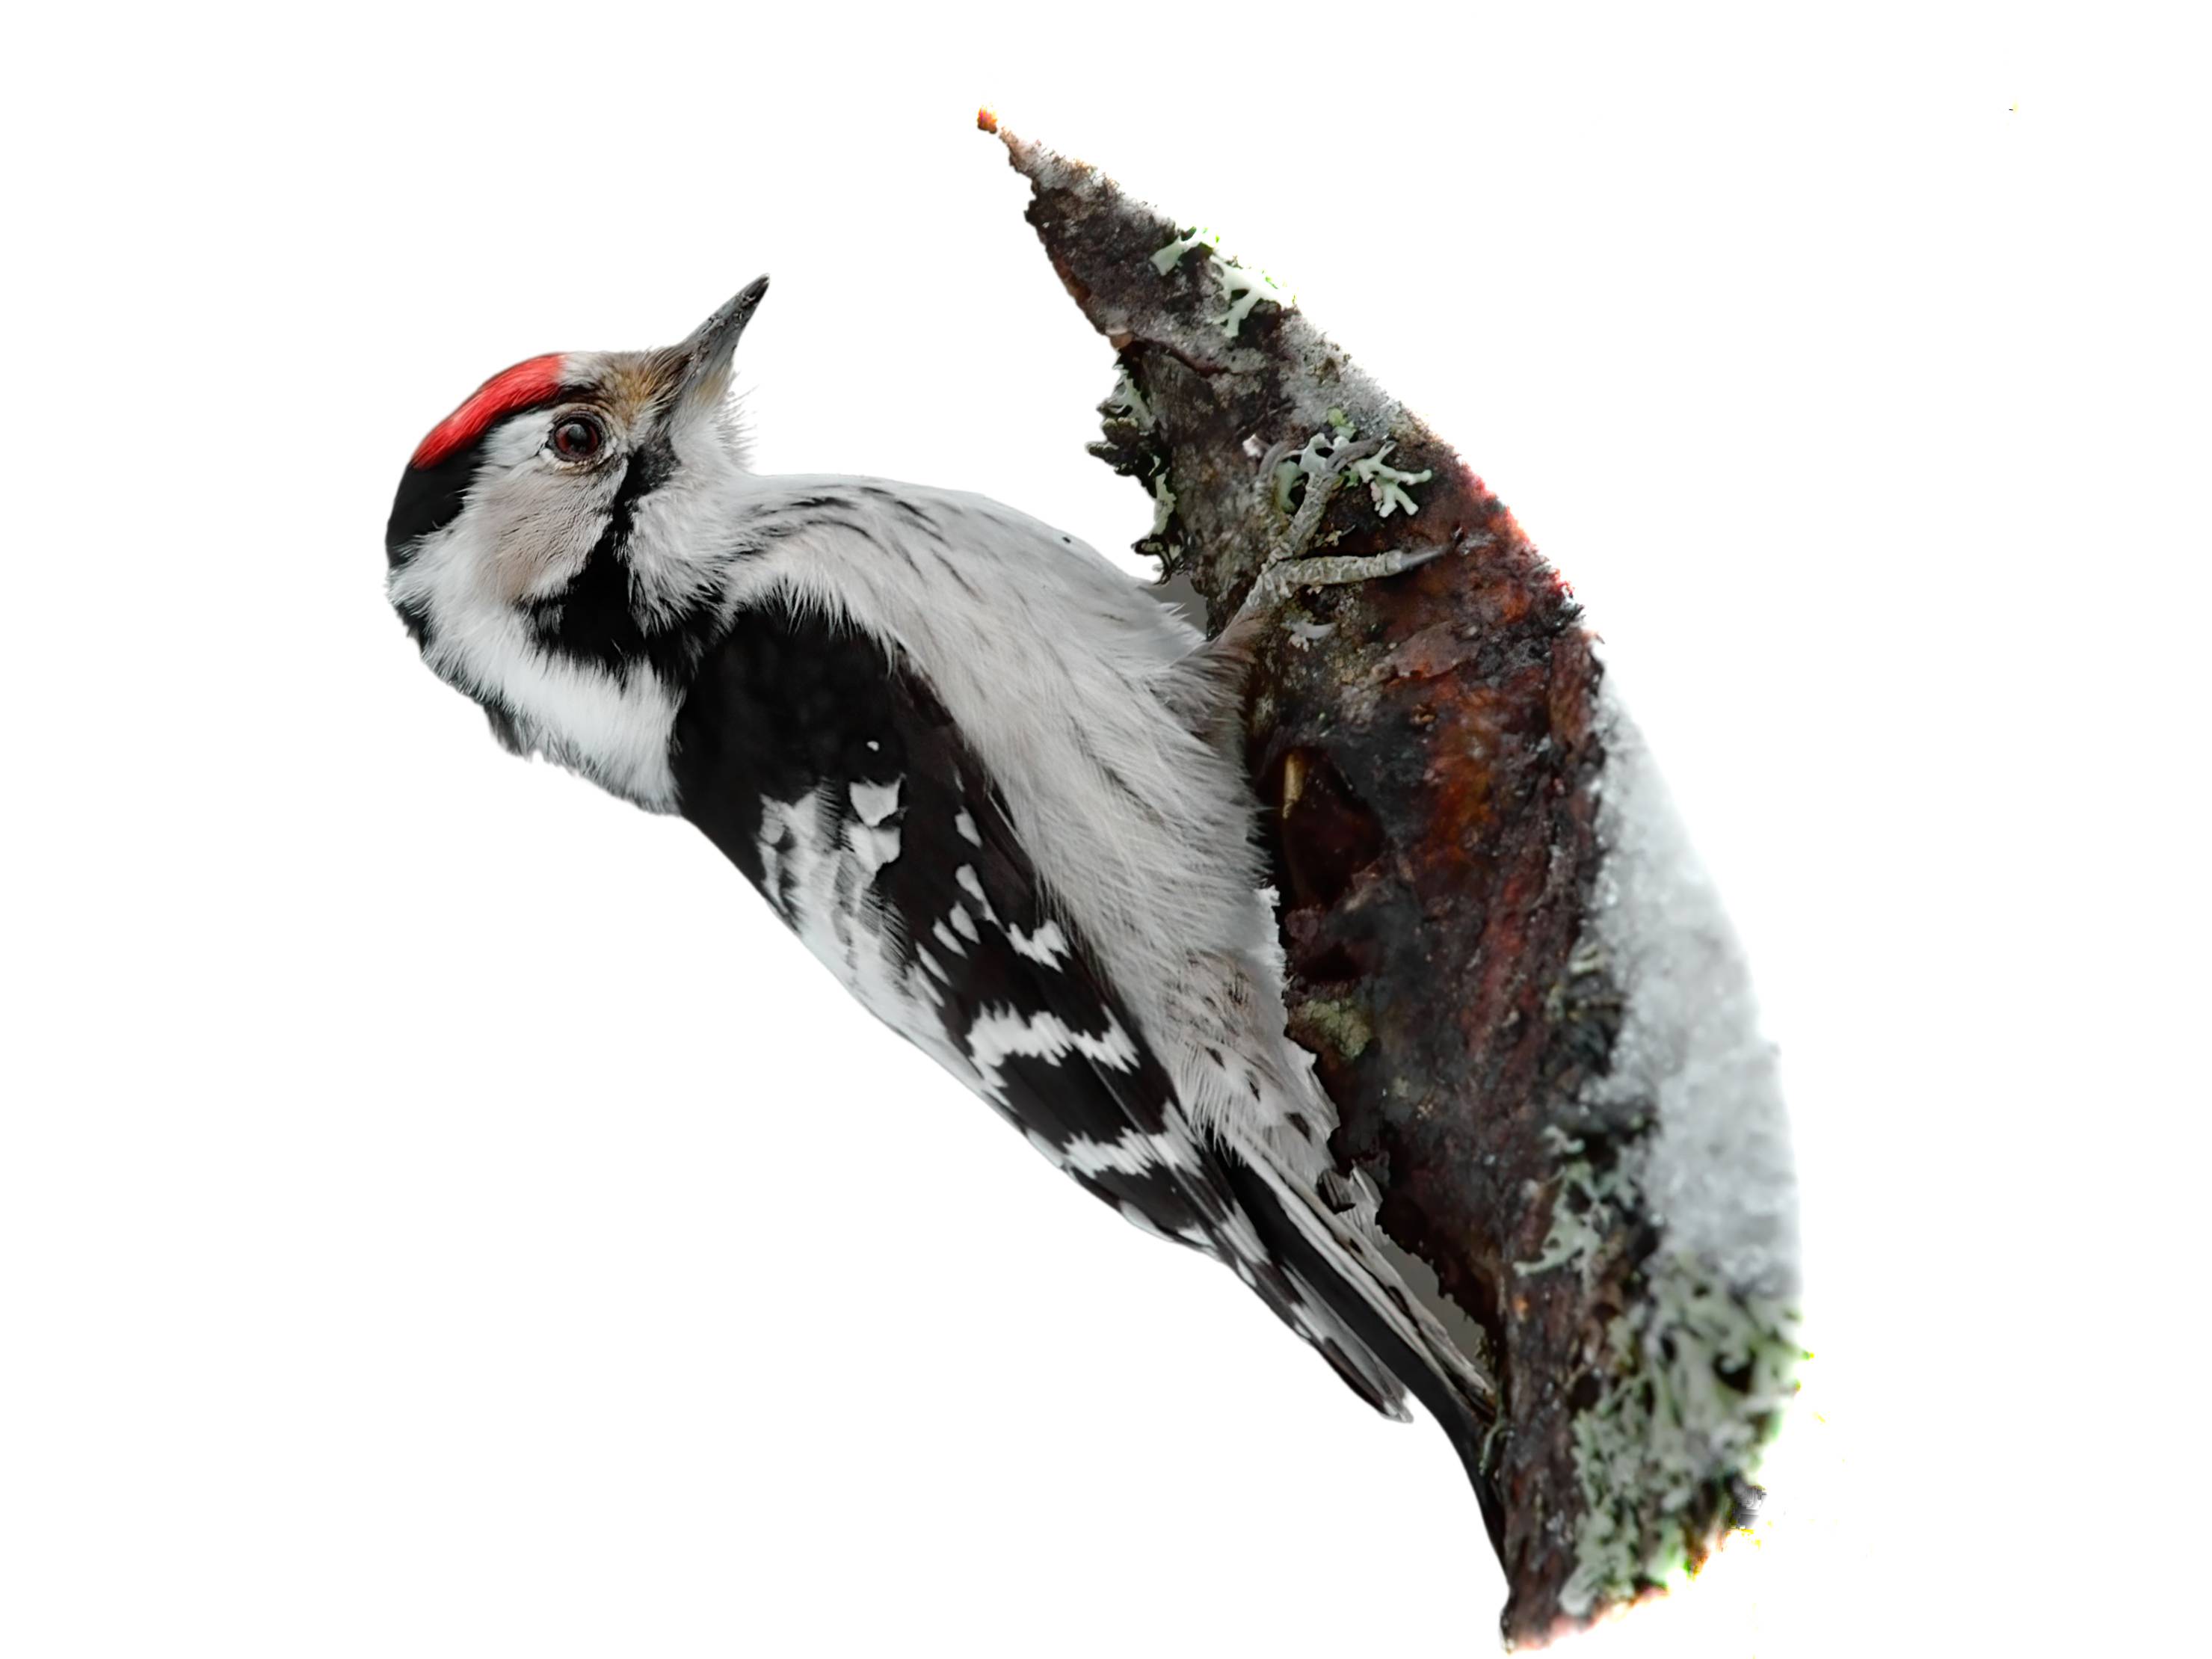 A photo of a Lesser Spotted Woodpecker (Dryobates minor), male